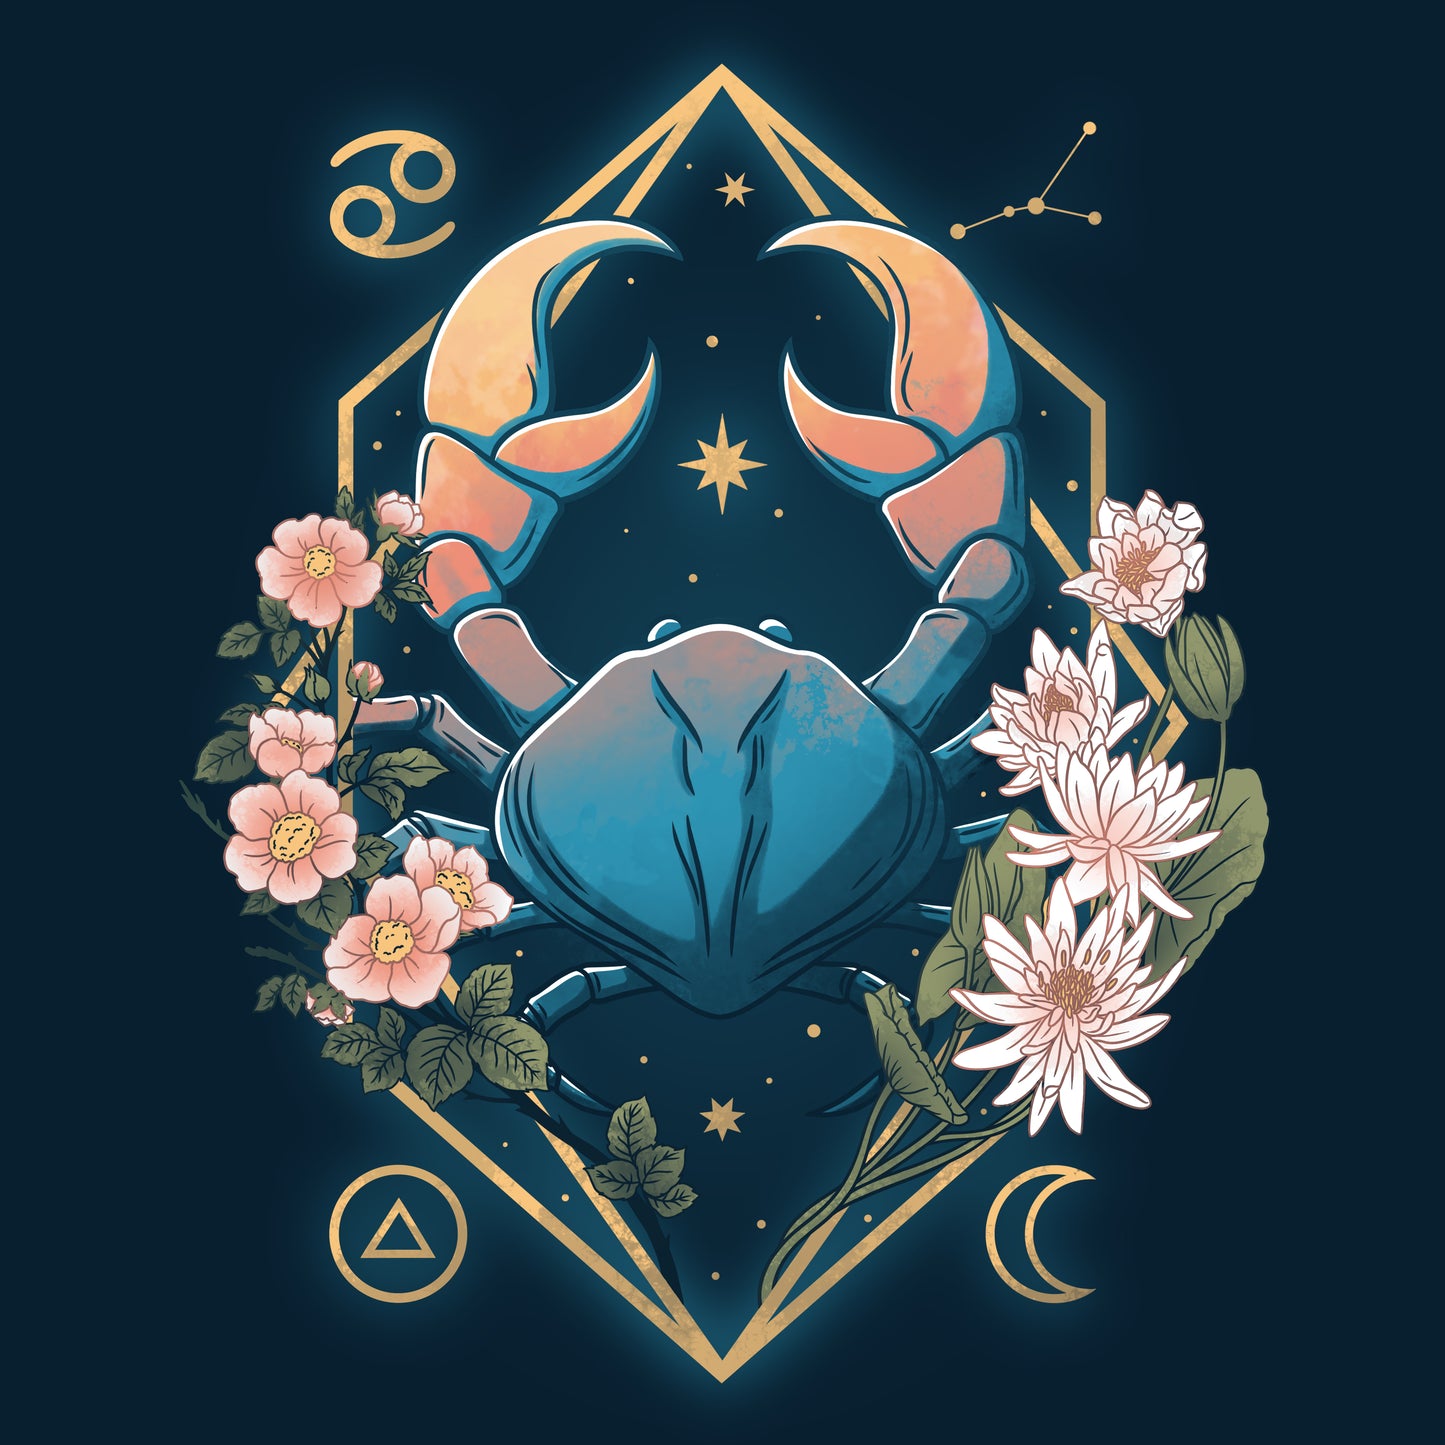 Navy blue Cancer Zodiac T-shirt featuring a crab, flowers, and stars representing the Cancer zodiac sign by TeeTurtle.